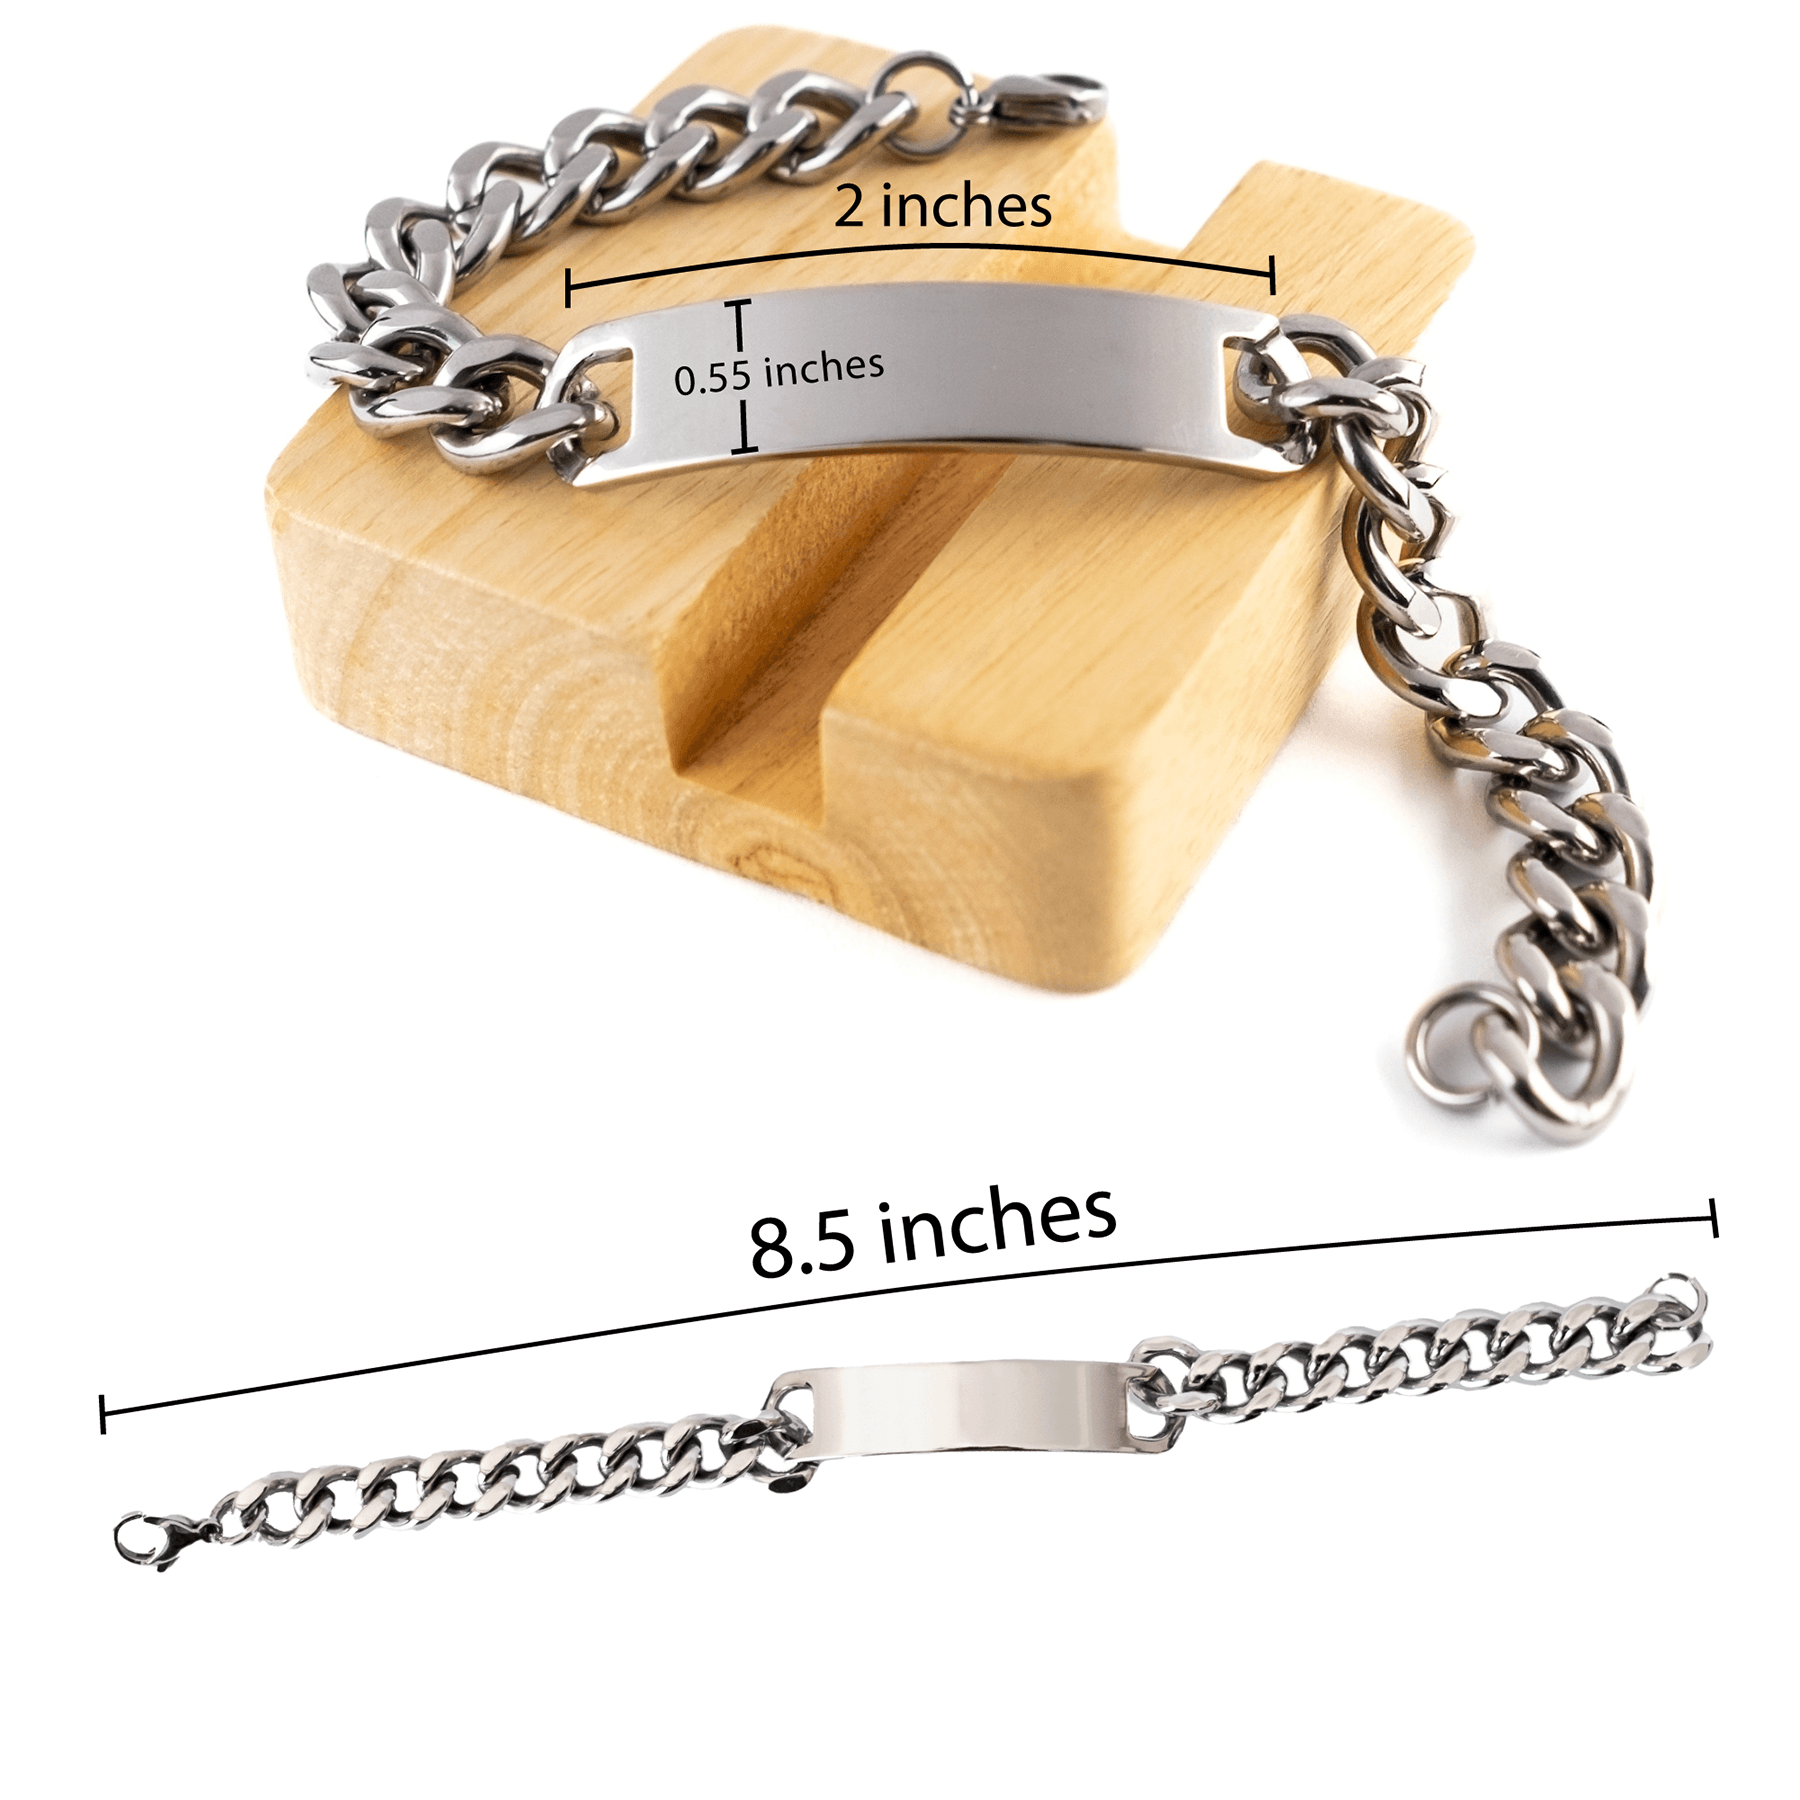 Insurance Sales Agent Cuban Chain Link Engraved Bracelet - Thanks for being who you are - Birthday Christmas Jewelry Gifts Coworkers Colleague Boss - Mallard Moon Gift Shop